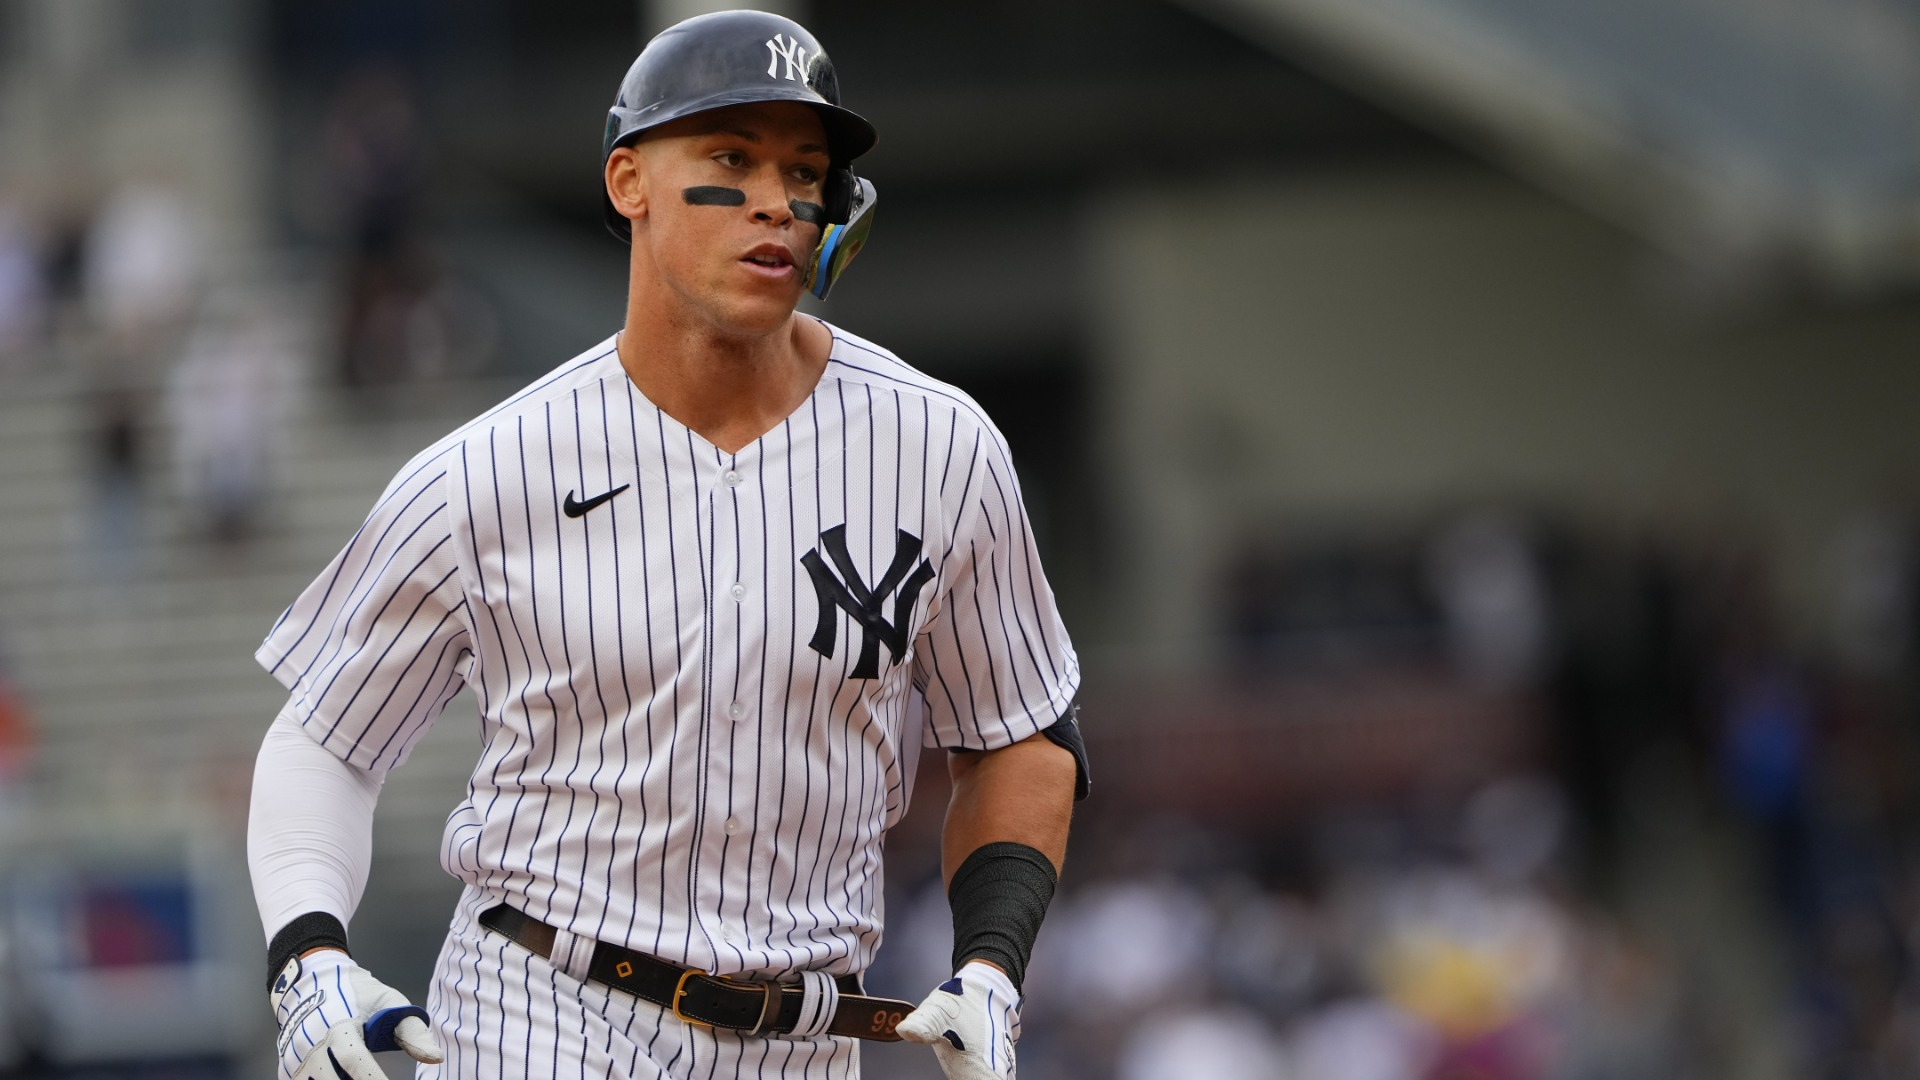 The Game Day MLB on X: Buster Olney reported today the Yankees